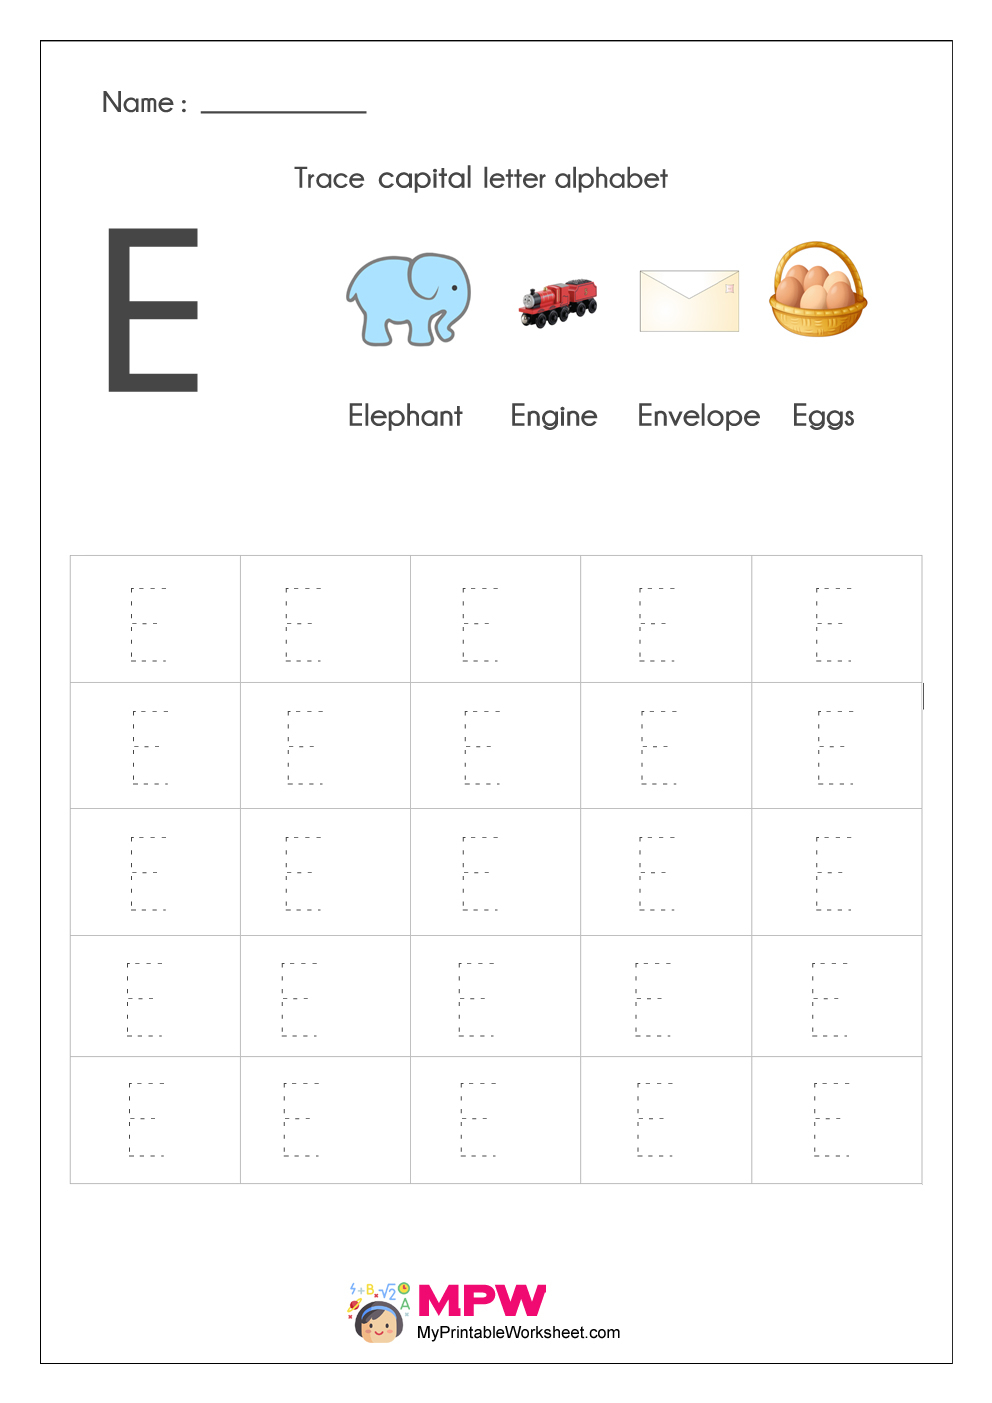 Alphabet Tracing Worksheets, Printable English Capital for Letter Tracing E